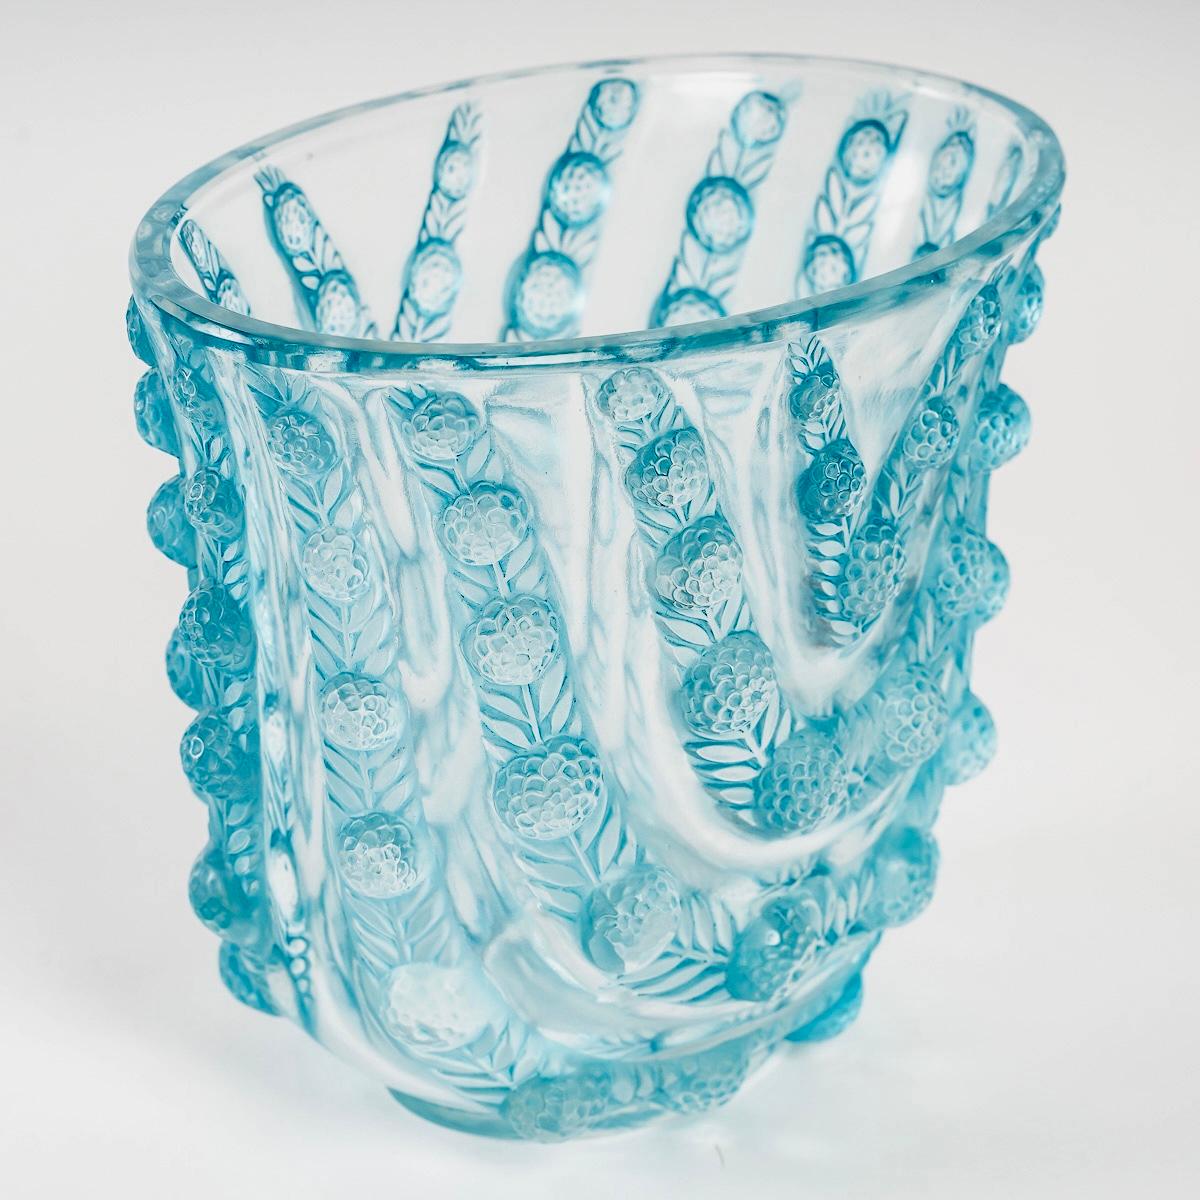 Art Deco 1937 René Lalique Vichy Vase in Glass with Blue Patina, Flowers